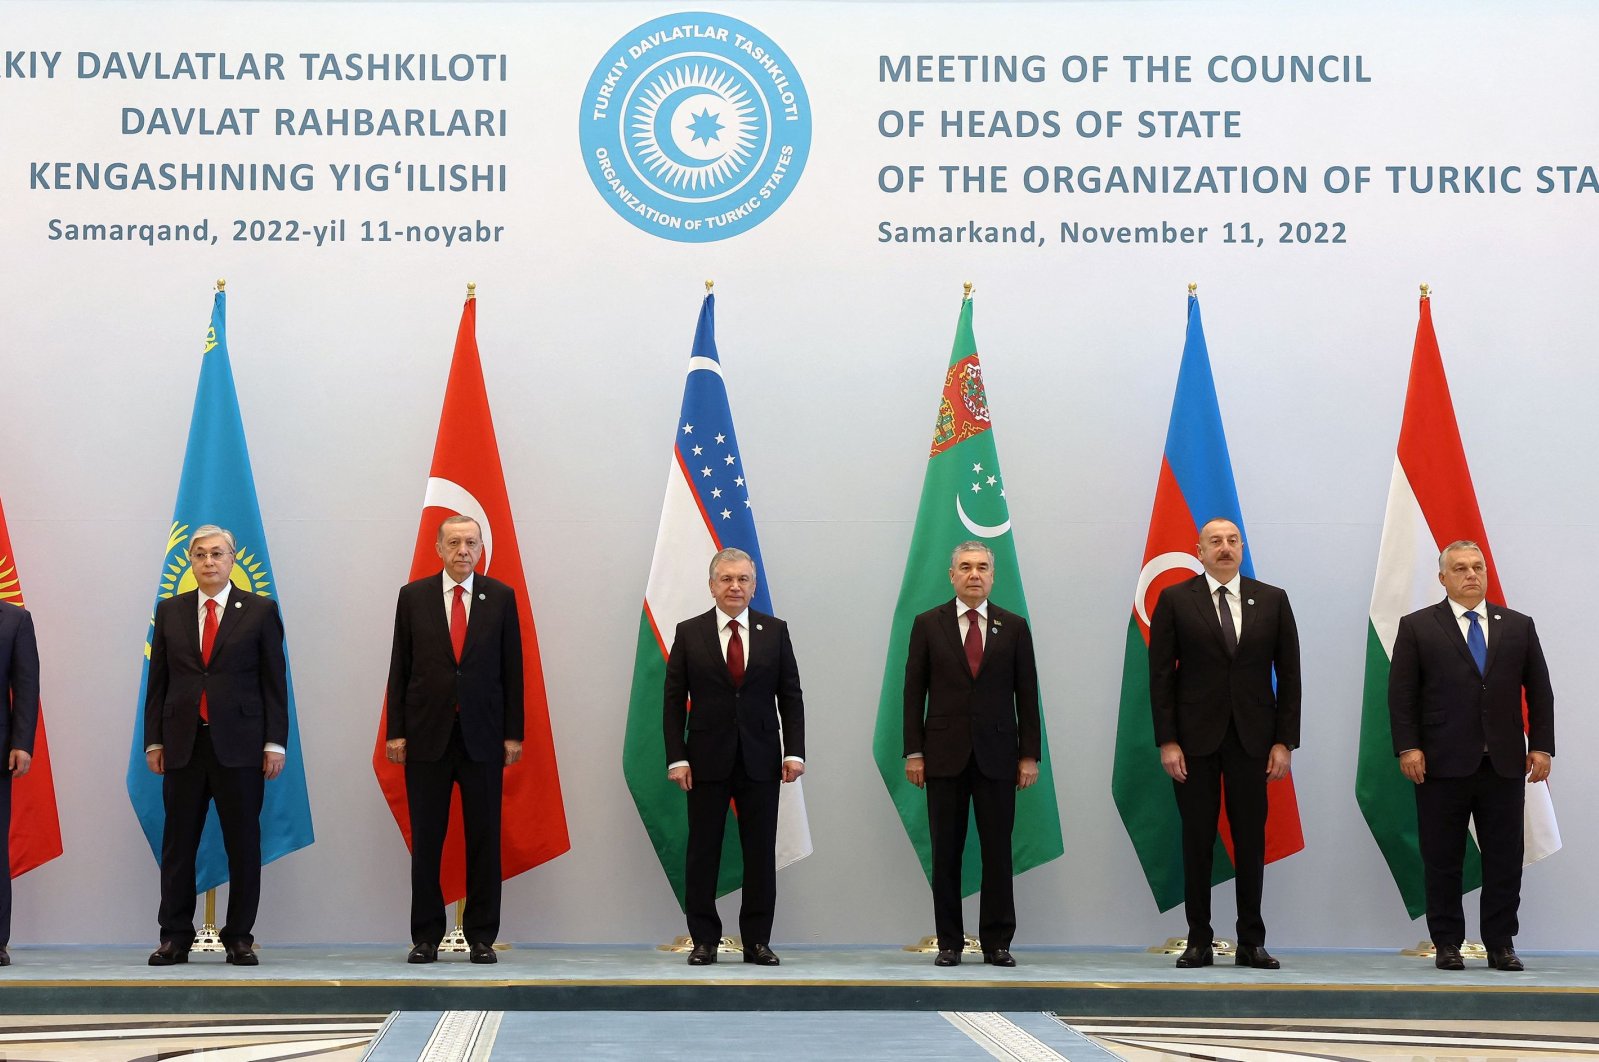 Heads of state stand during the 9th Summit of the Organization of Turkic States (OTS) in Samarkand, Uzbekistan, Nov. 11, 2022. (AFP Photo)